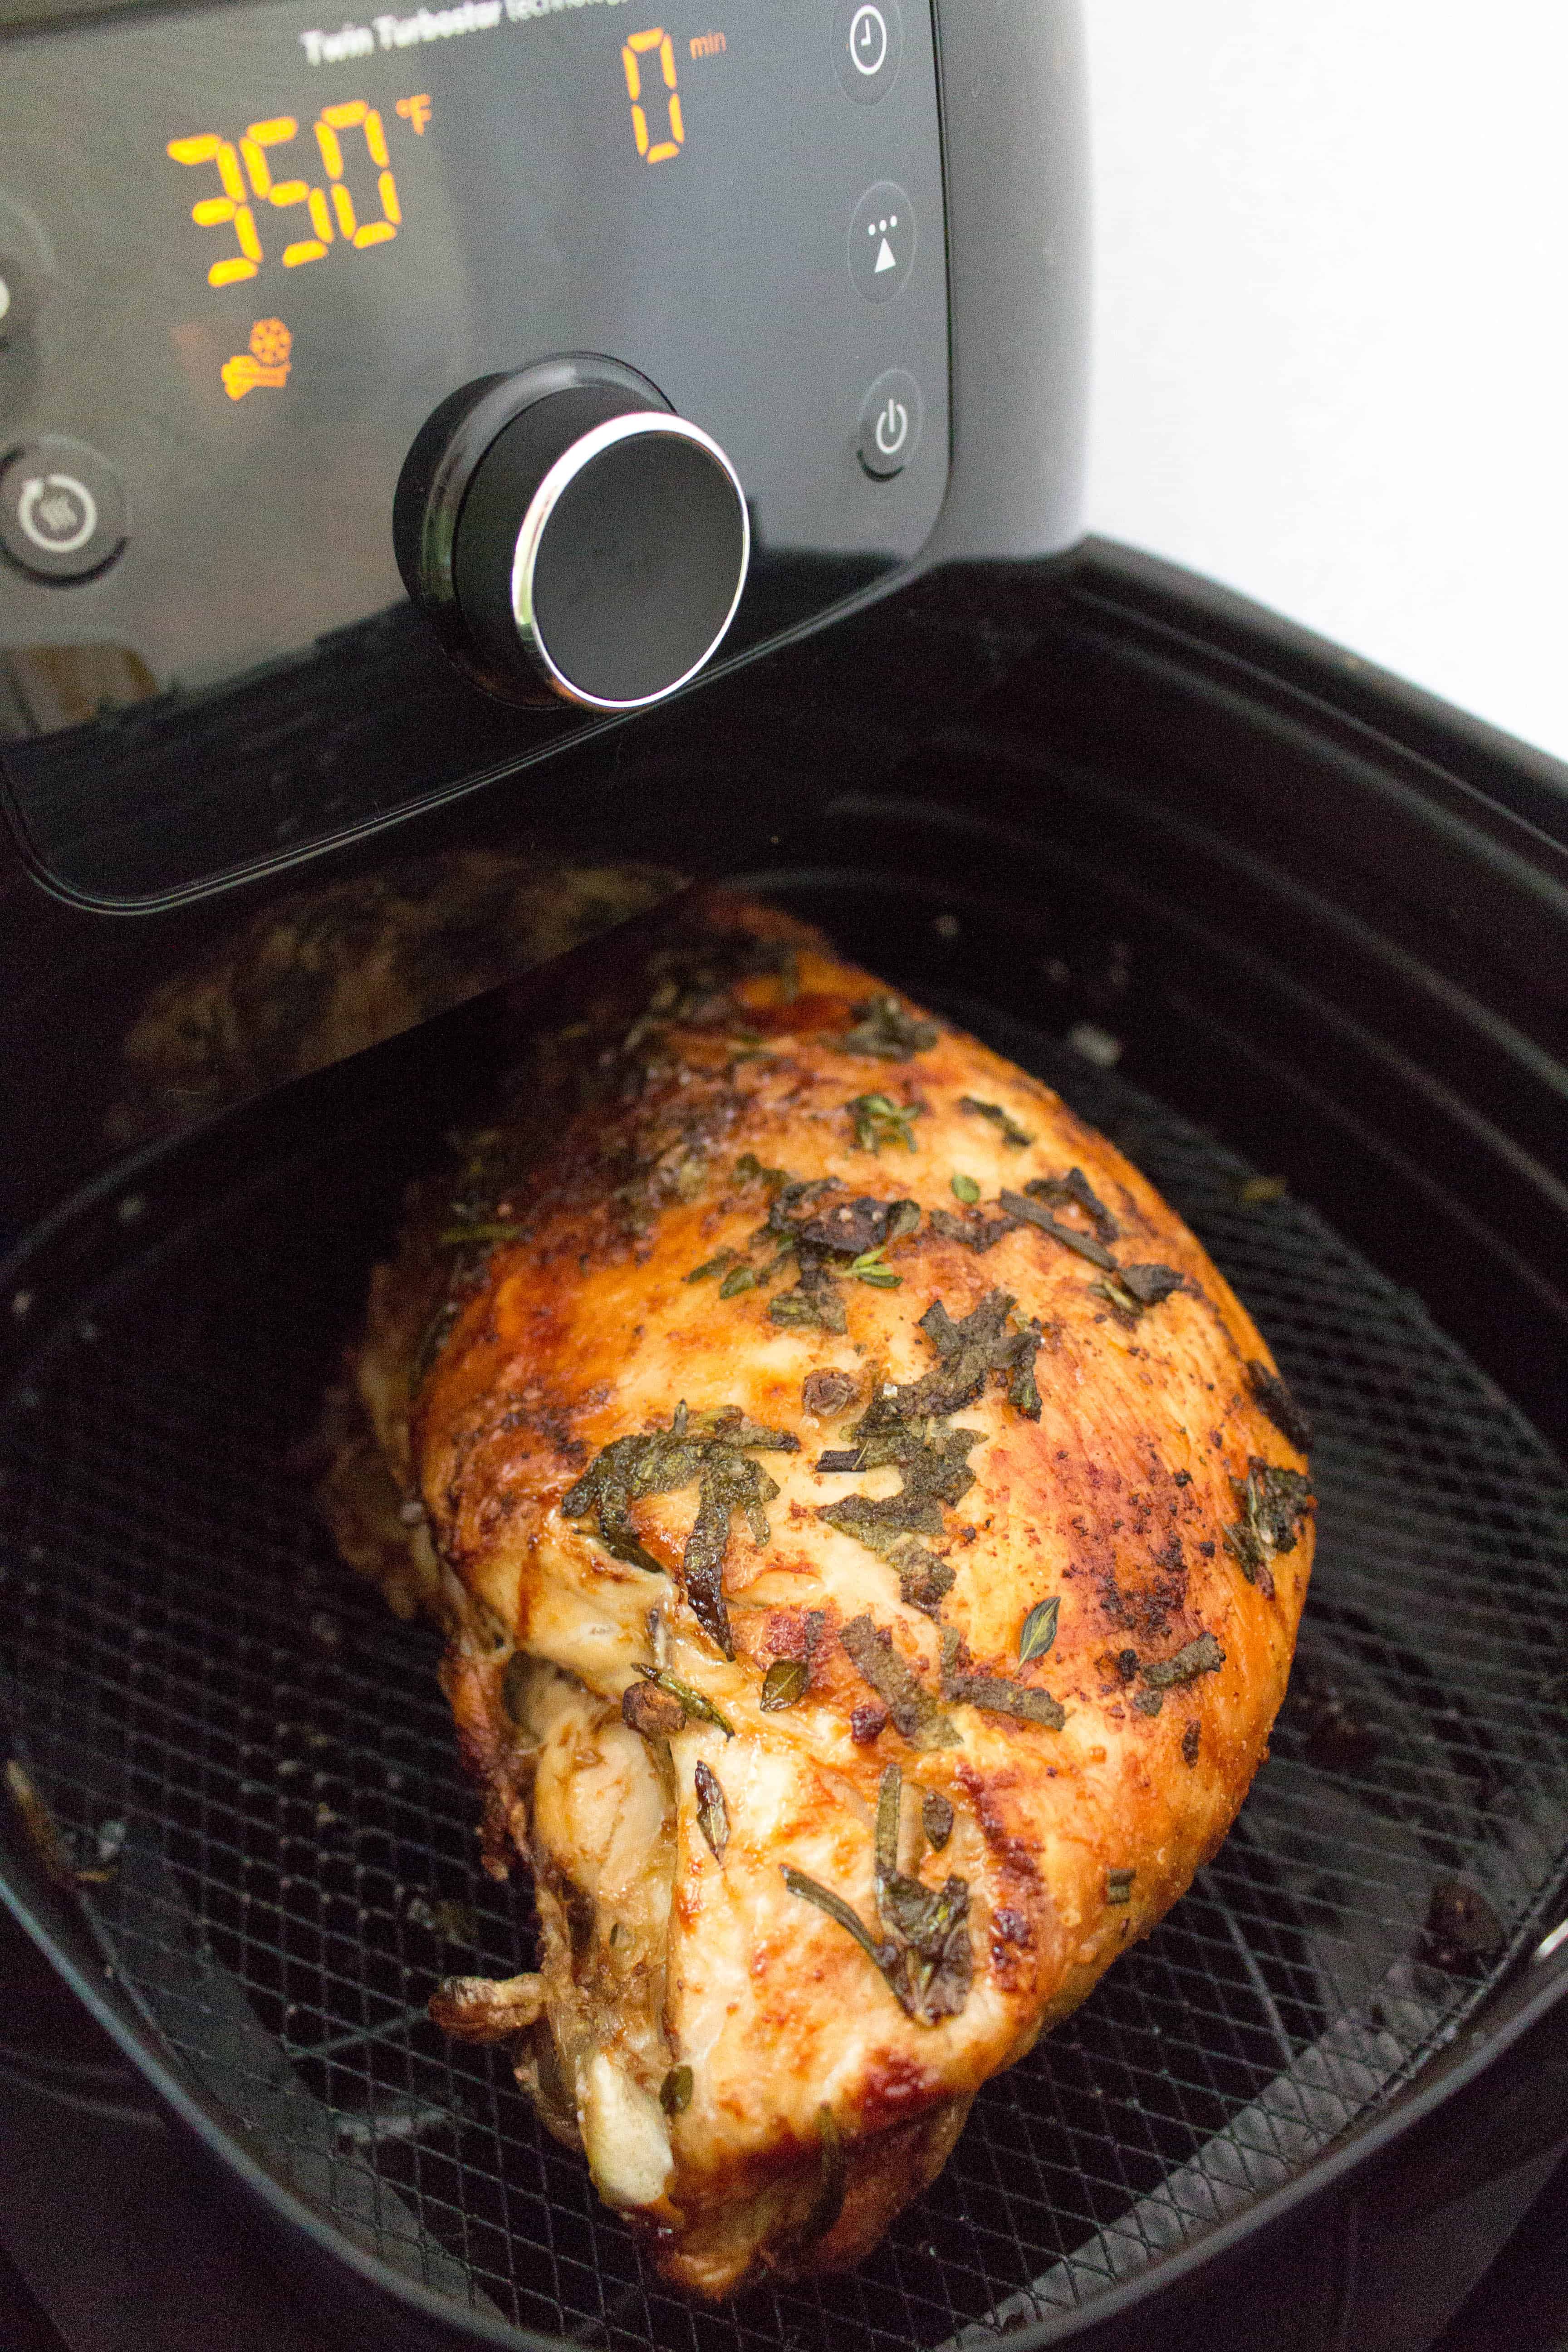 Looking to make a simple turkey dinner for a small group of friends or family? Try this simple air fryer turkey dinner with with the Philips Airfryer XXL.